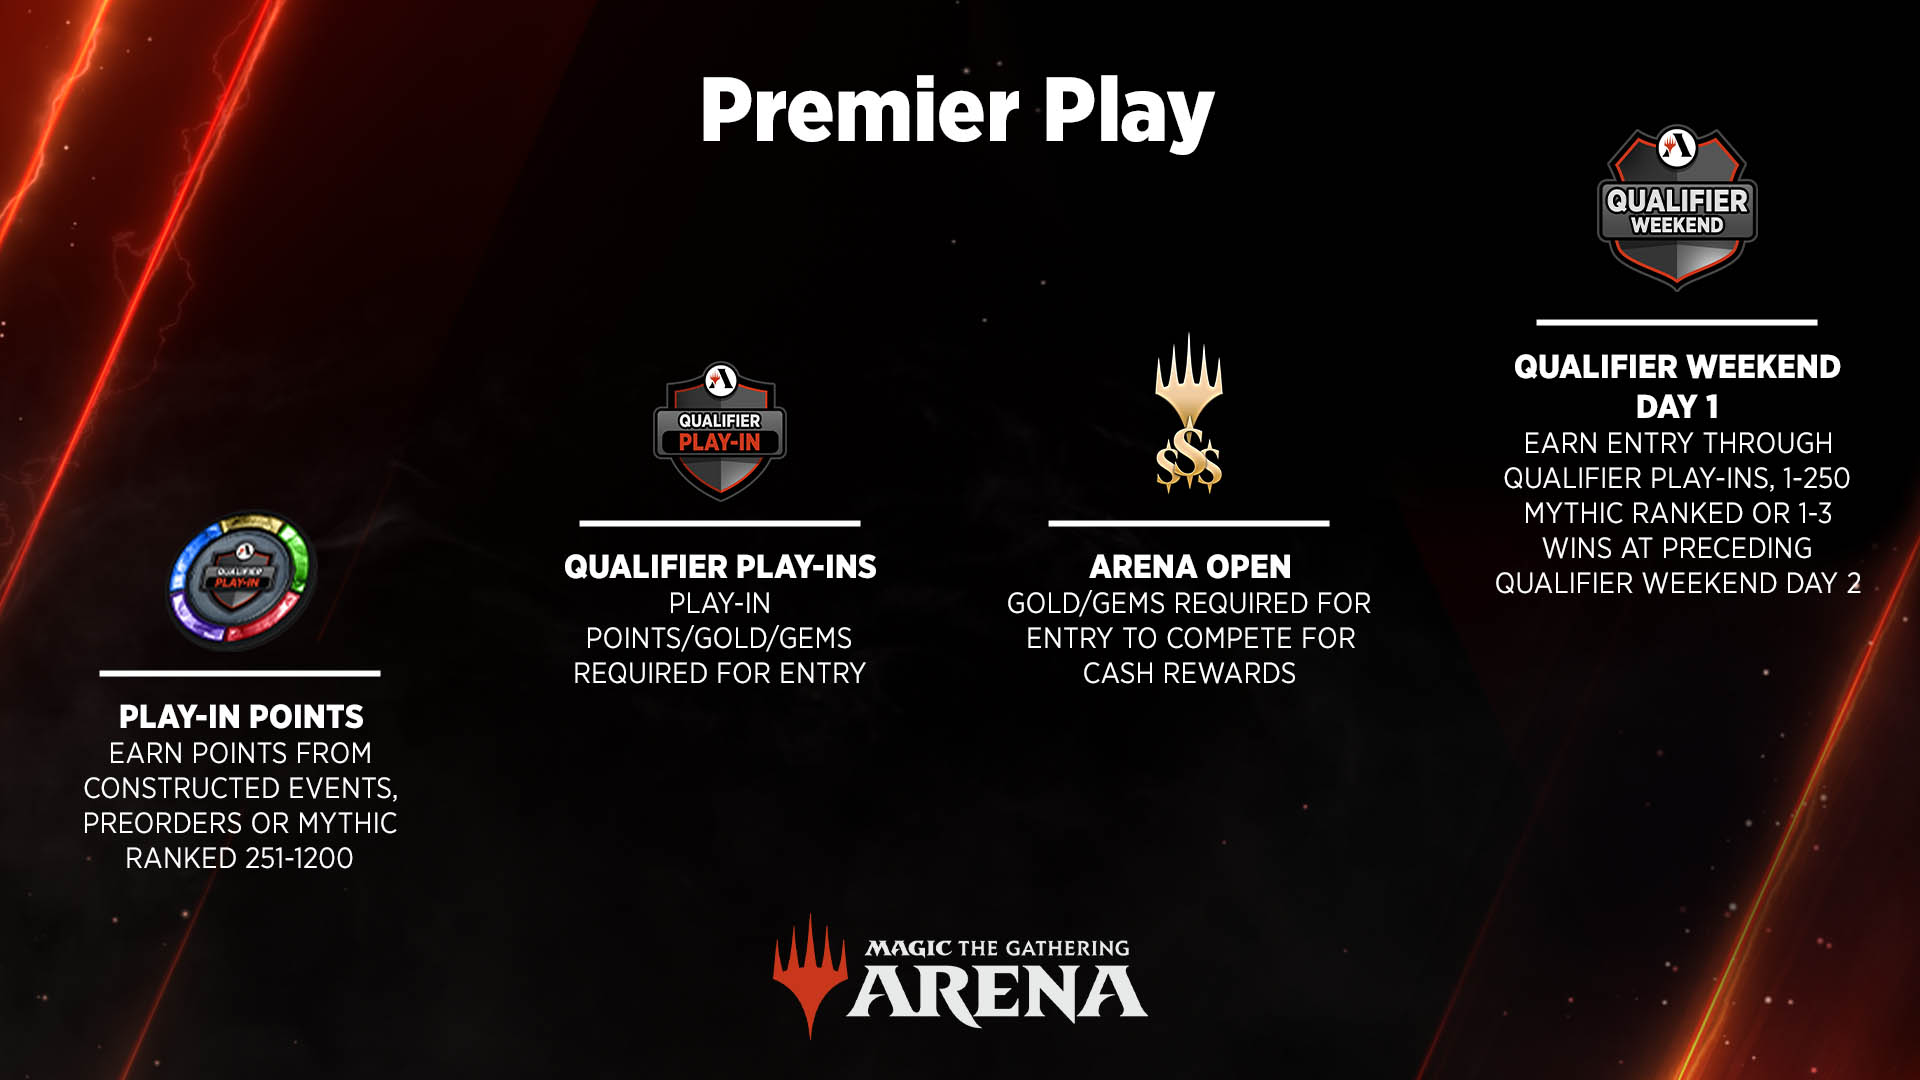 Premier Play path Play-In Points to Qualifier Play-Ins and Arena Opens, culiminating in the Qualifier Weekend Day One event